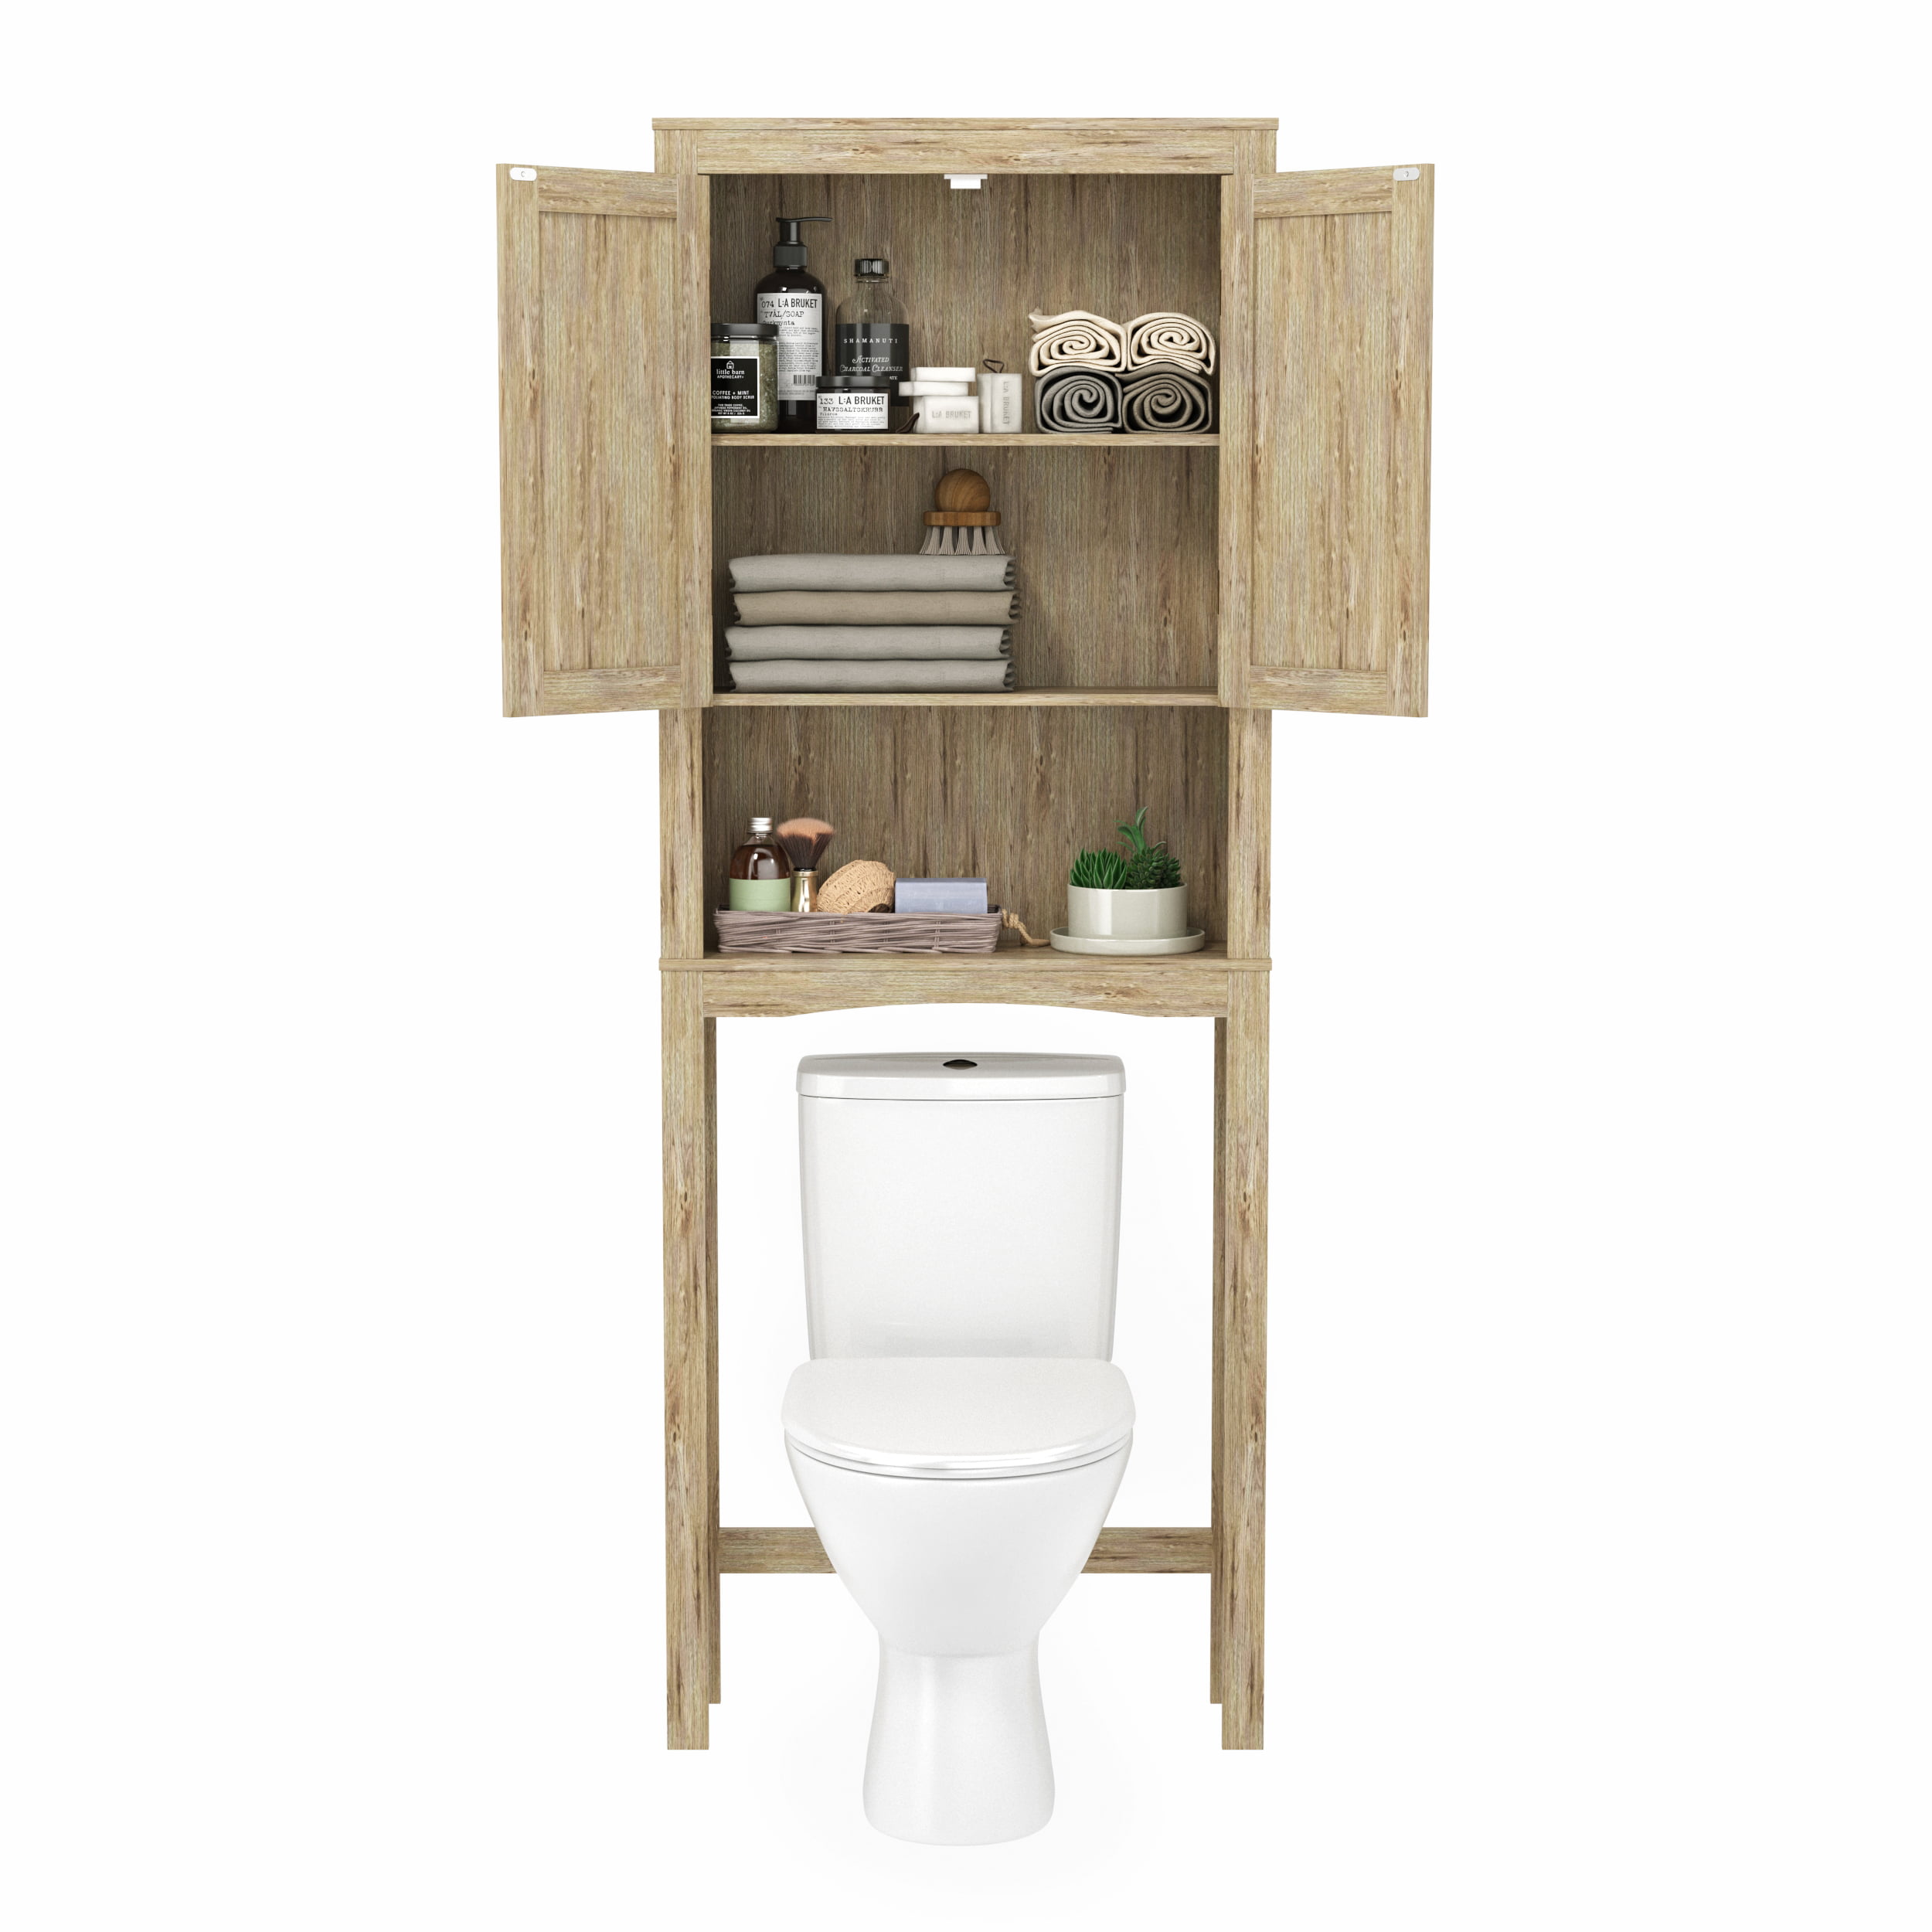 Wood Bathroom Toilet Over the Toilet Space Saver w/ 3Shelves and 2Doors Wall